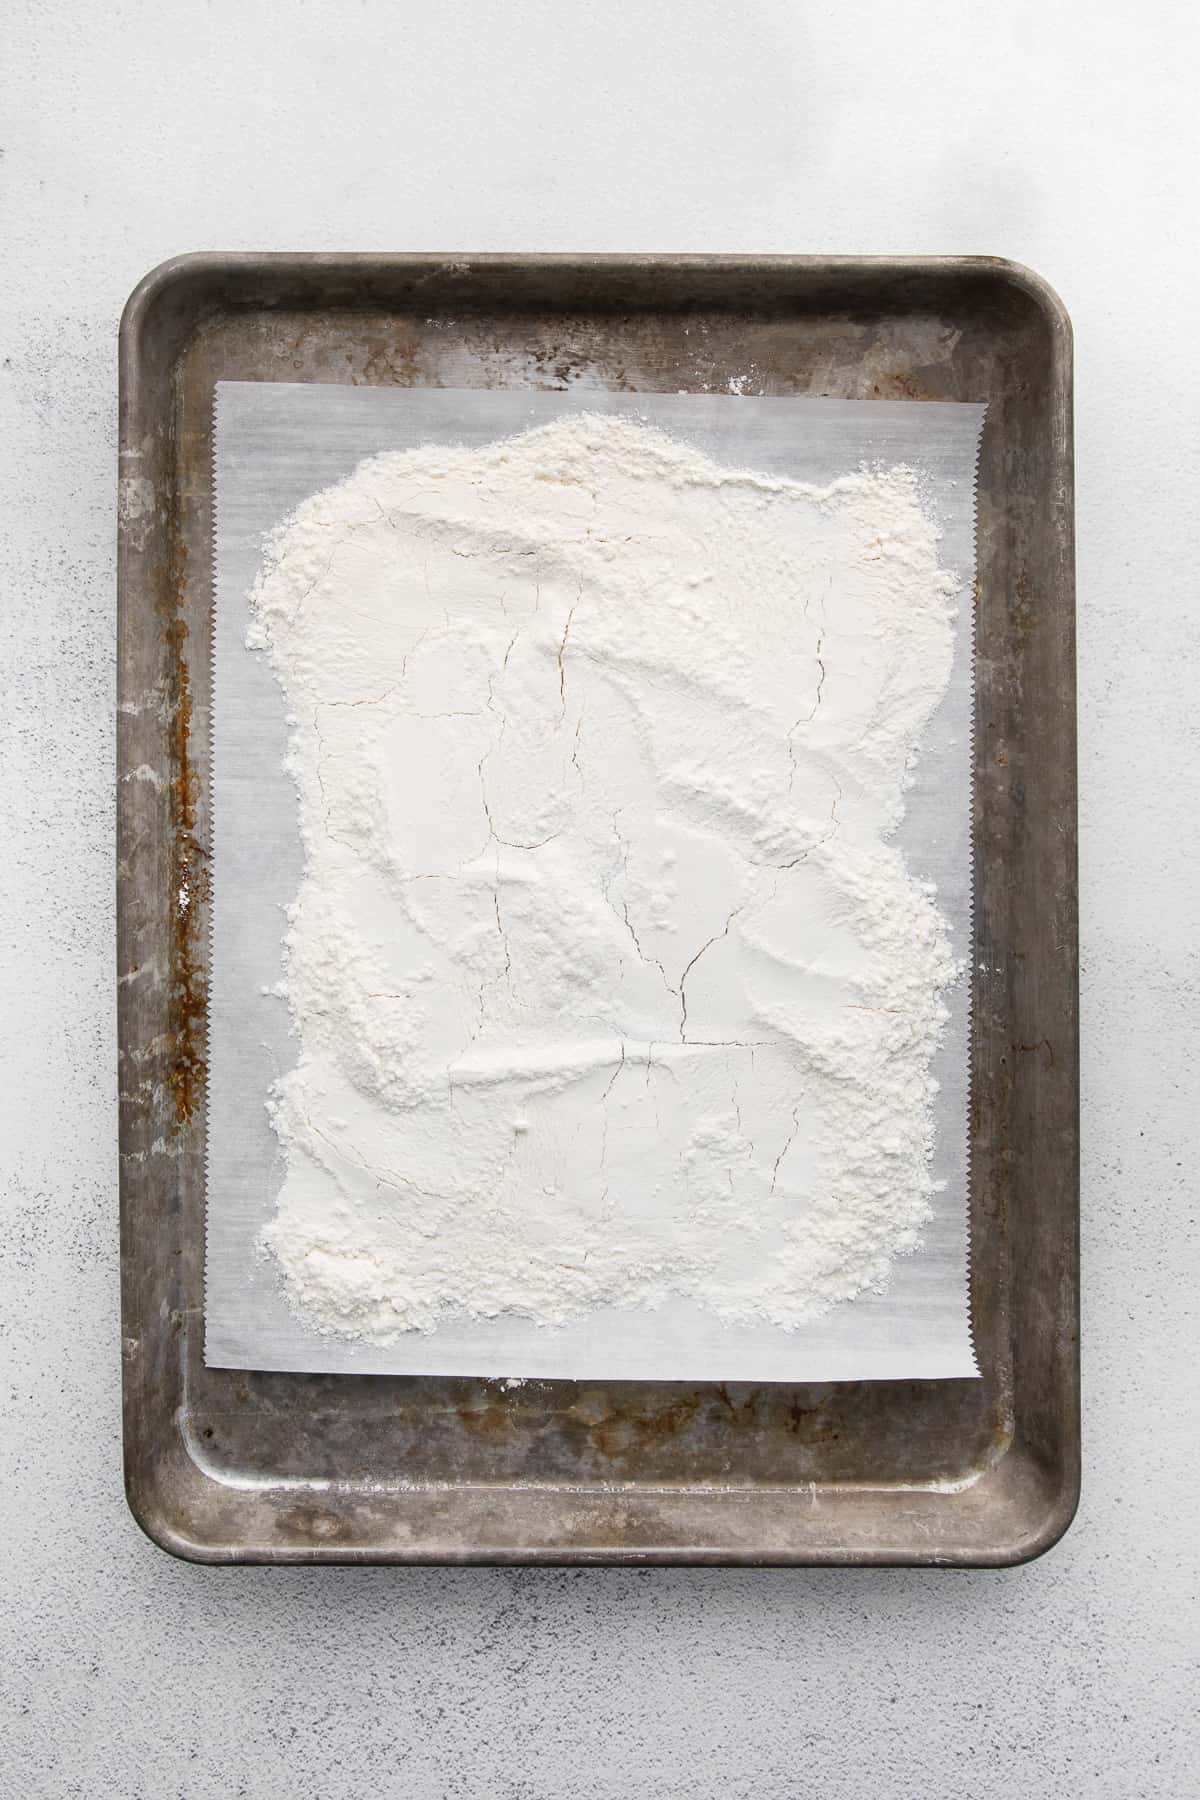 Flour spread on parchment-lined baking pan.